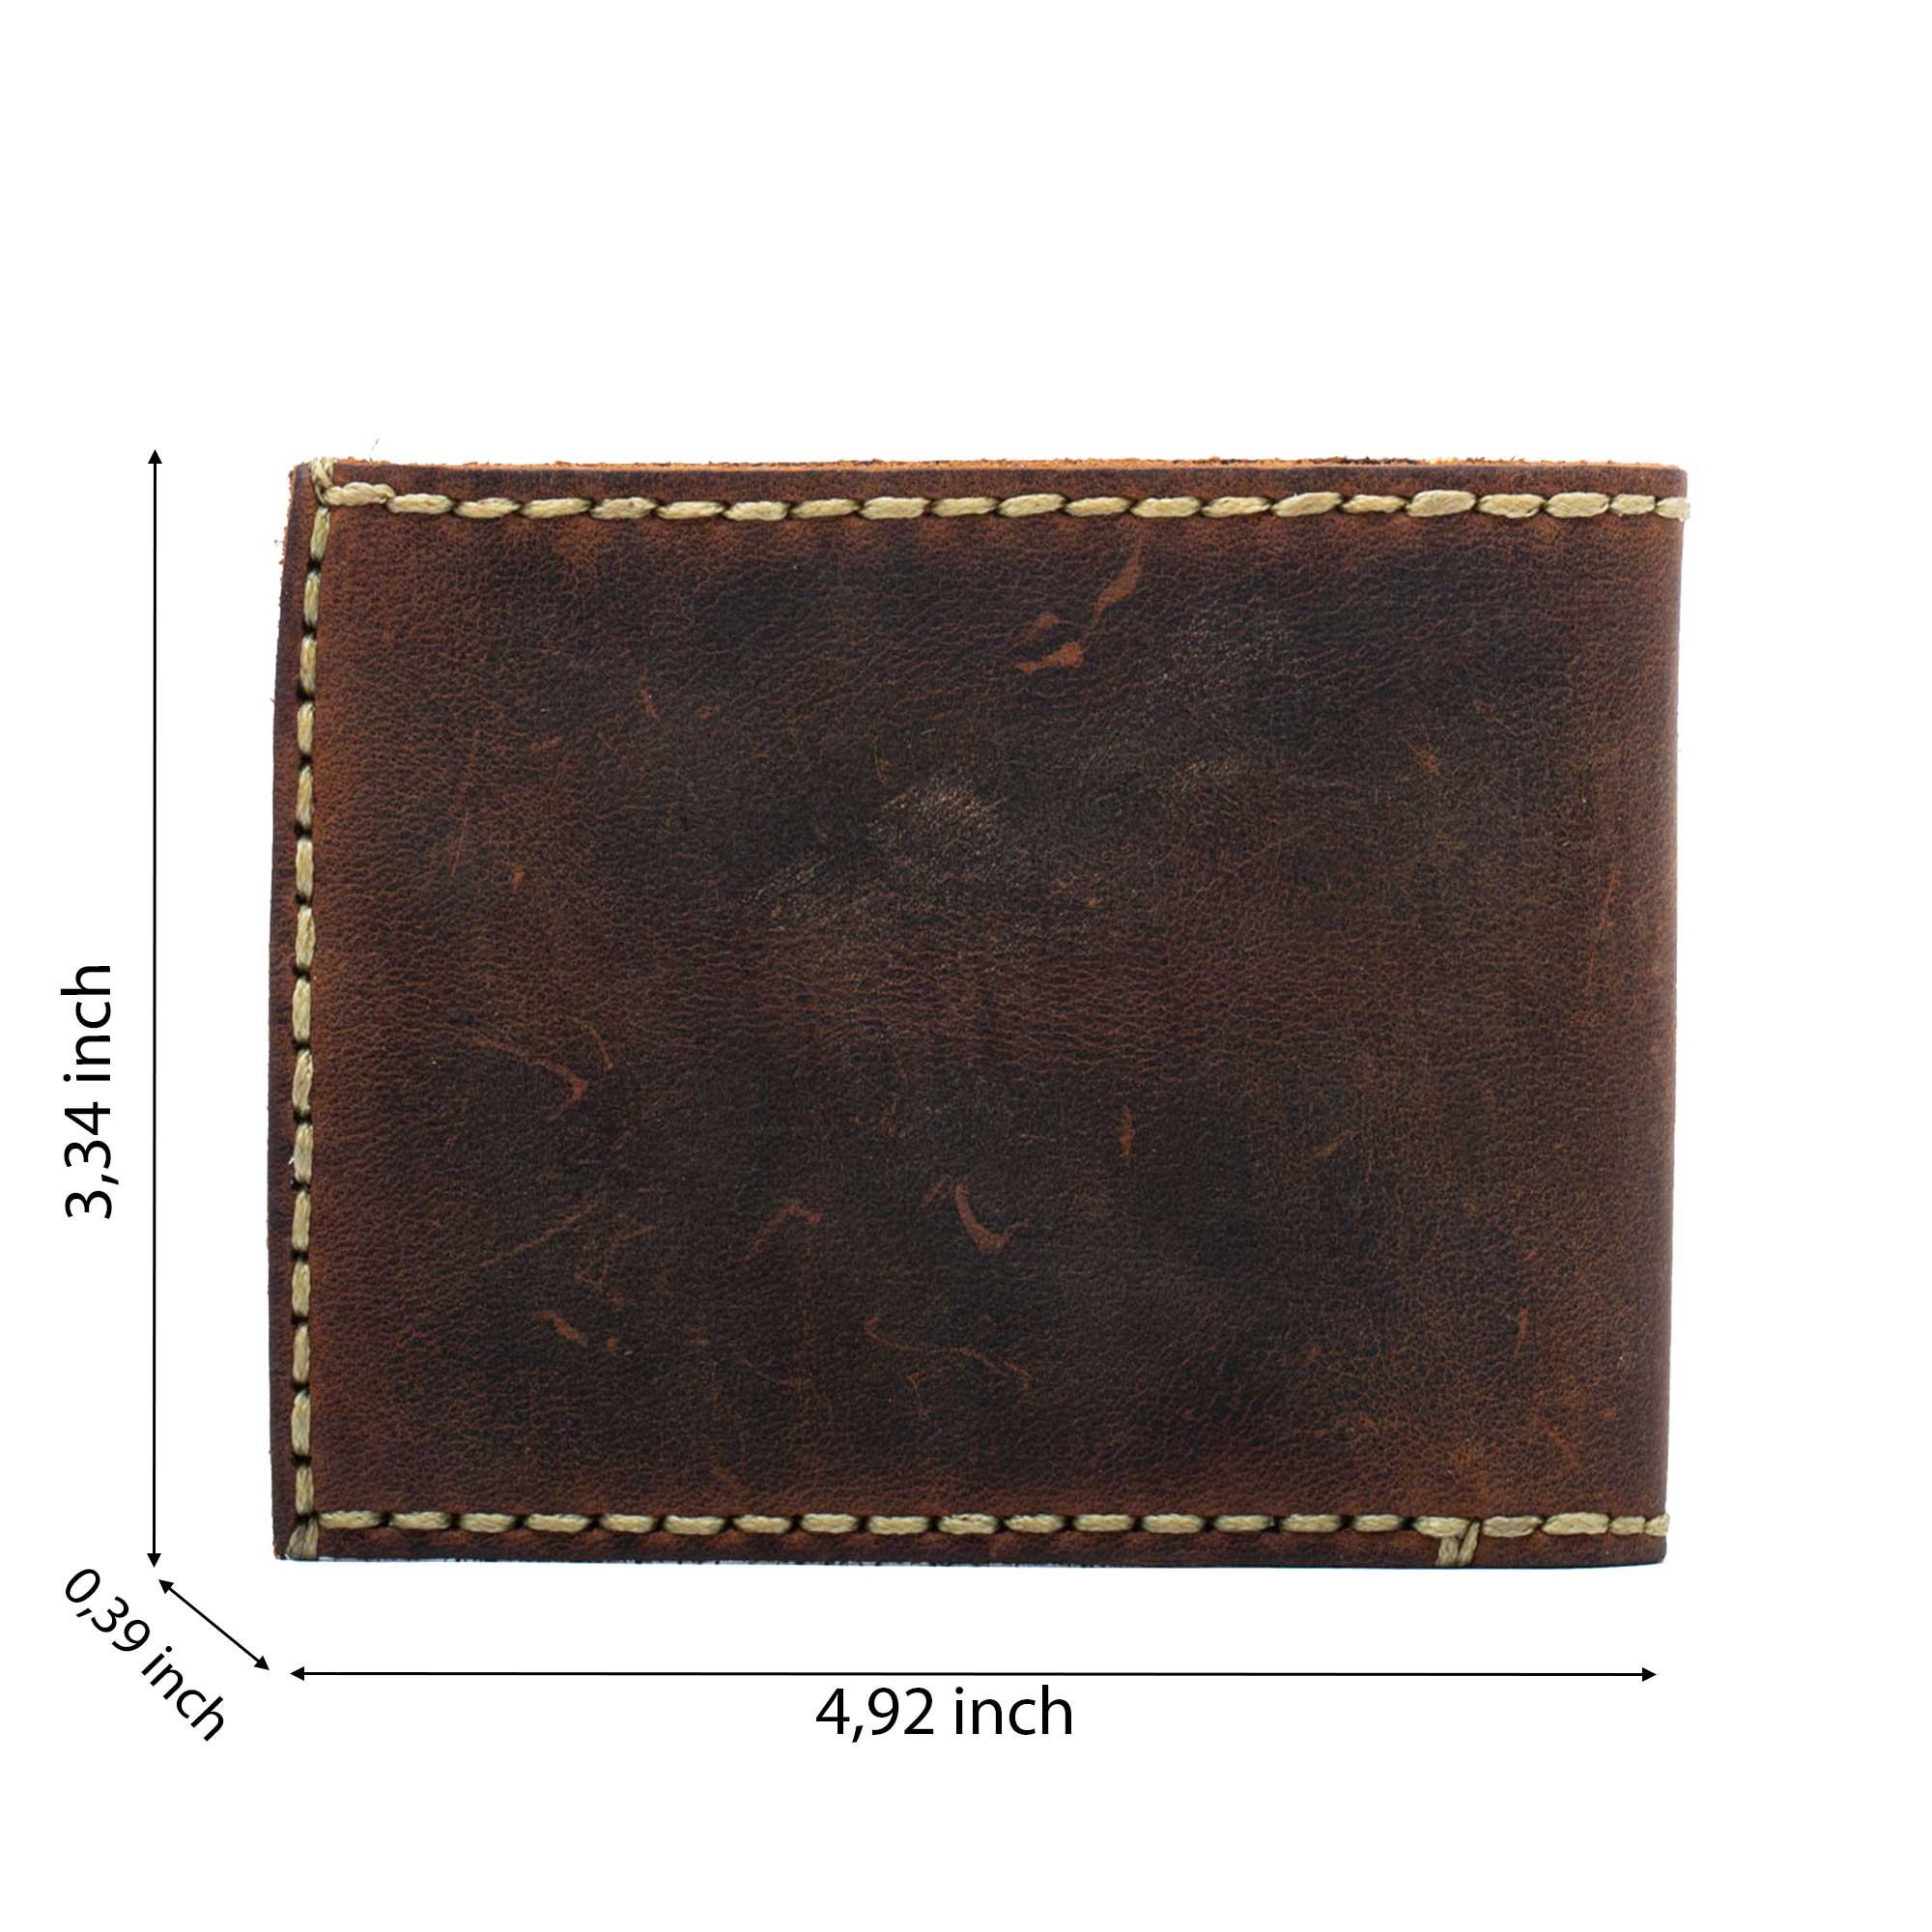  REMFACIO Custom Mens Wallets Photo Engraved Leather Wallets for  Men Personalized Wallets for Men Birthday Valentines Day Gifts (Dark Brown)  : Clothing, Shoes & Jewelry